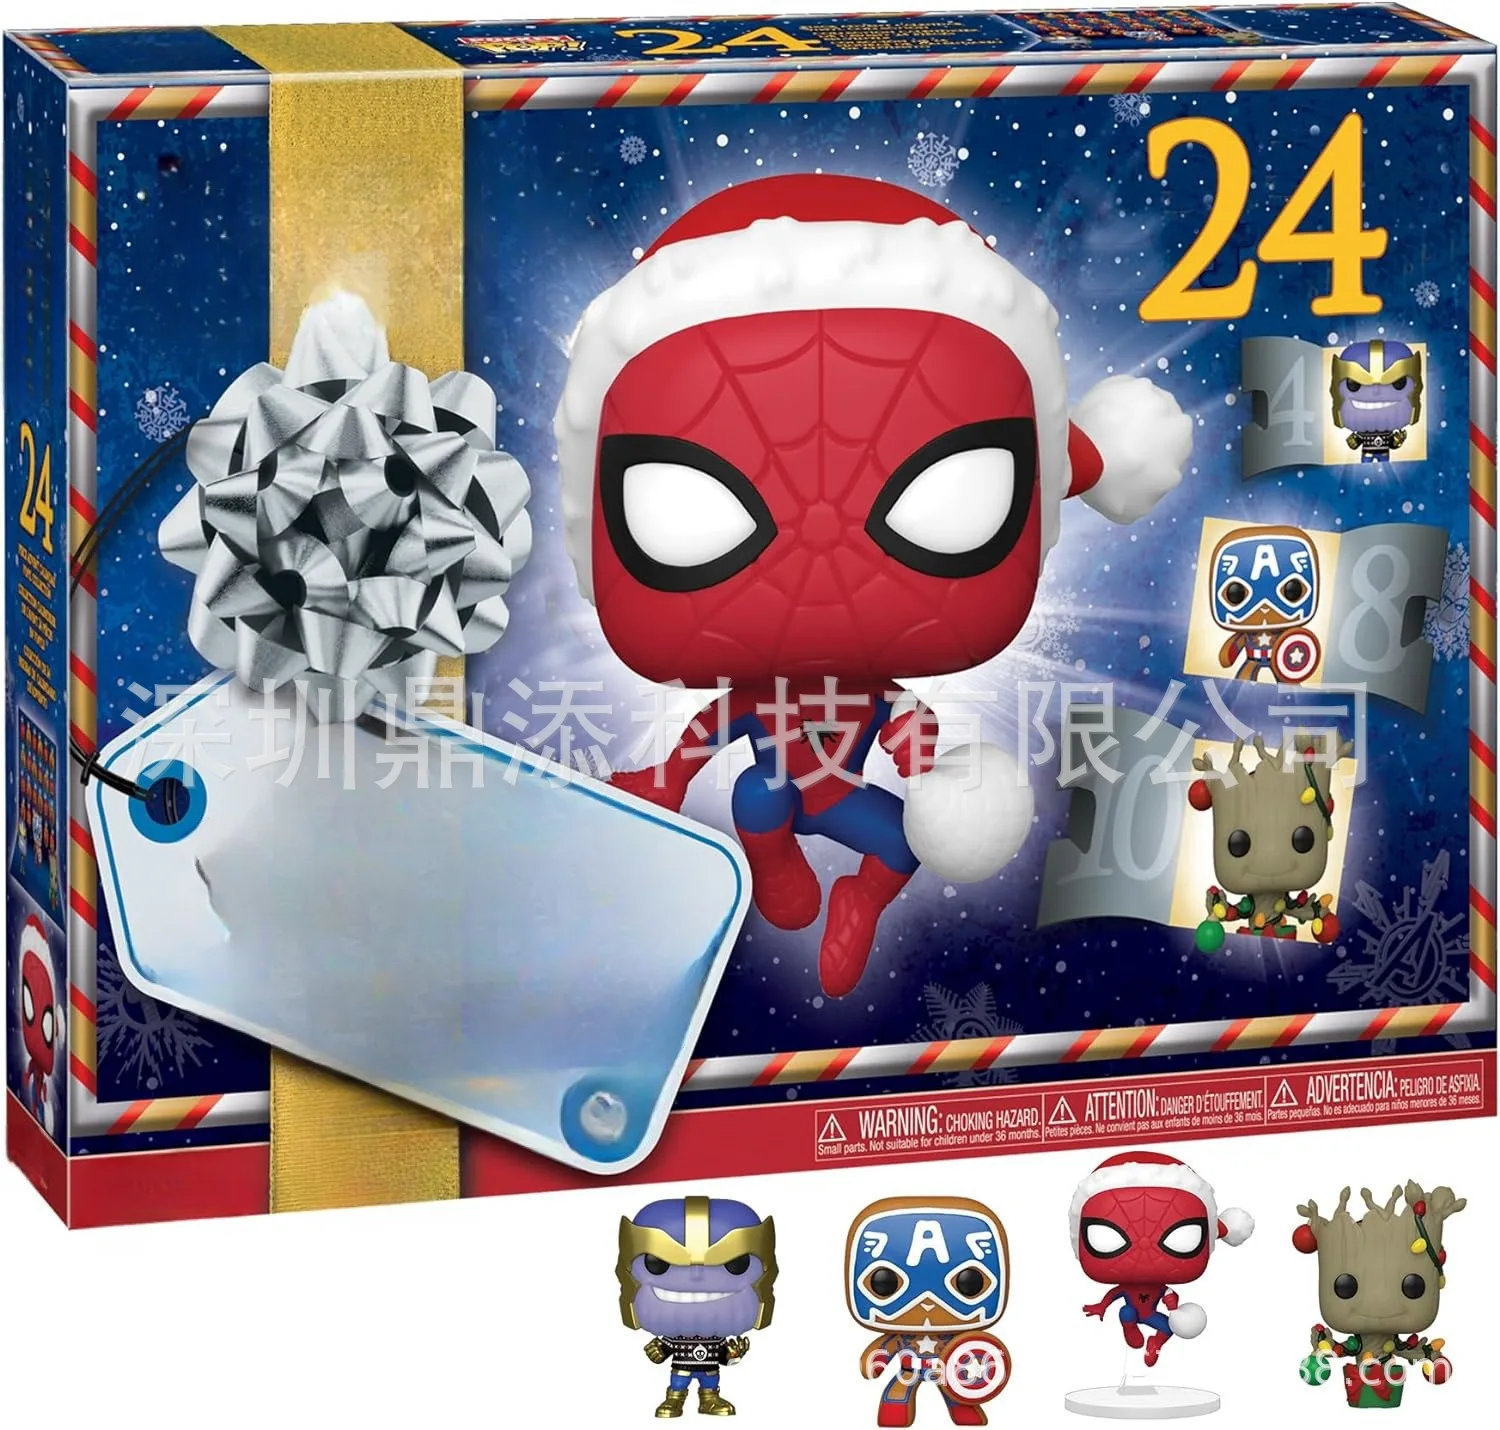 

In Stock New Disney Marvel Advent Calendar Holiday Calendar 24 Pocket Popular New Year Gifts For Kids Friends And Classmates